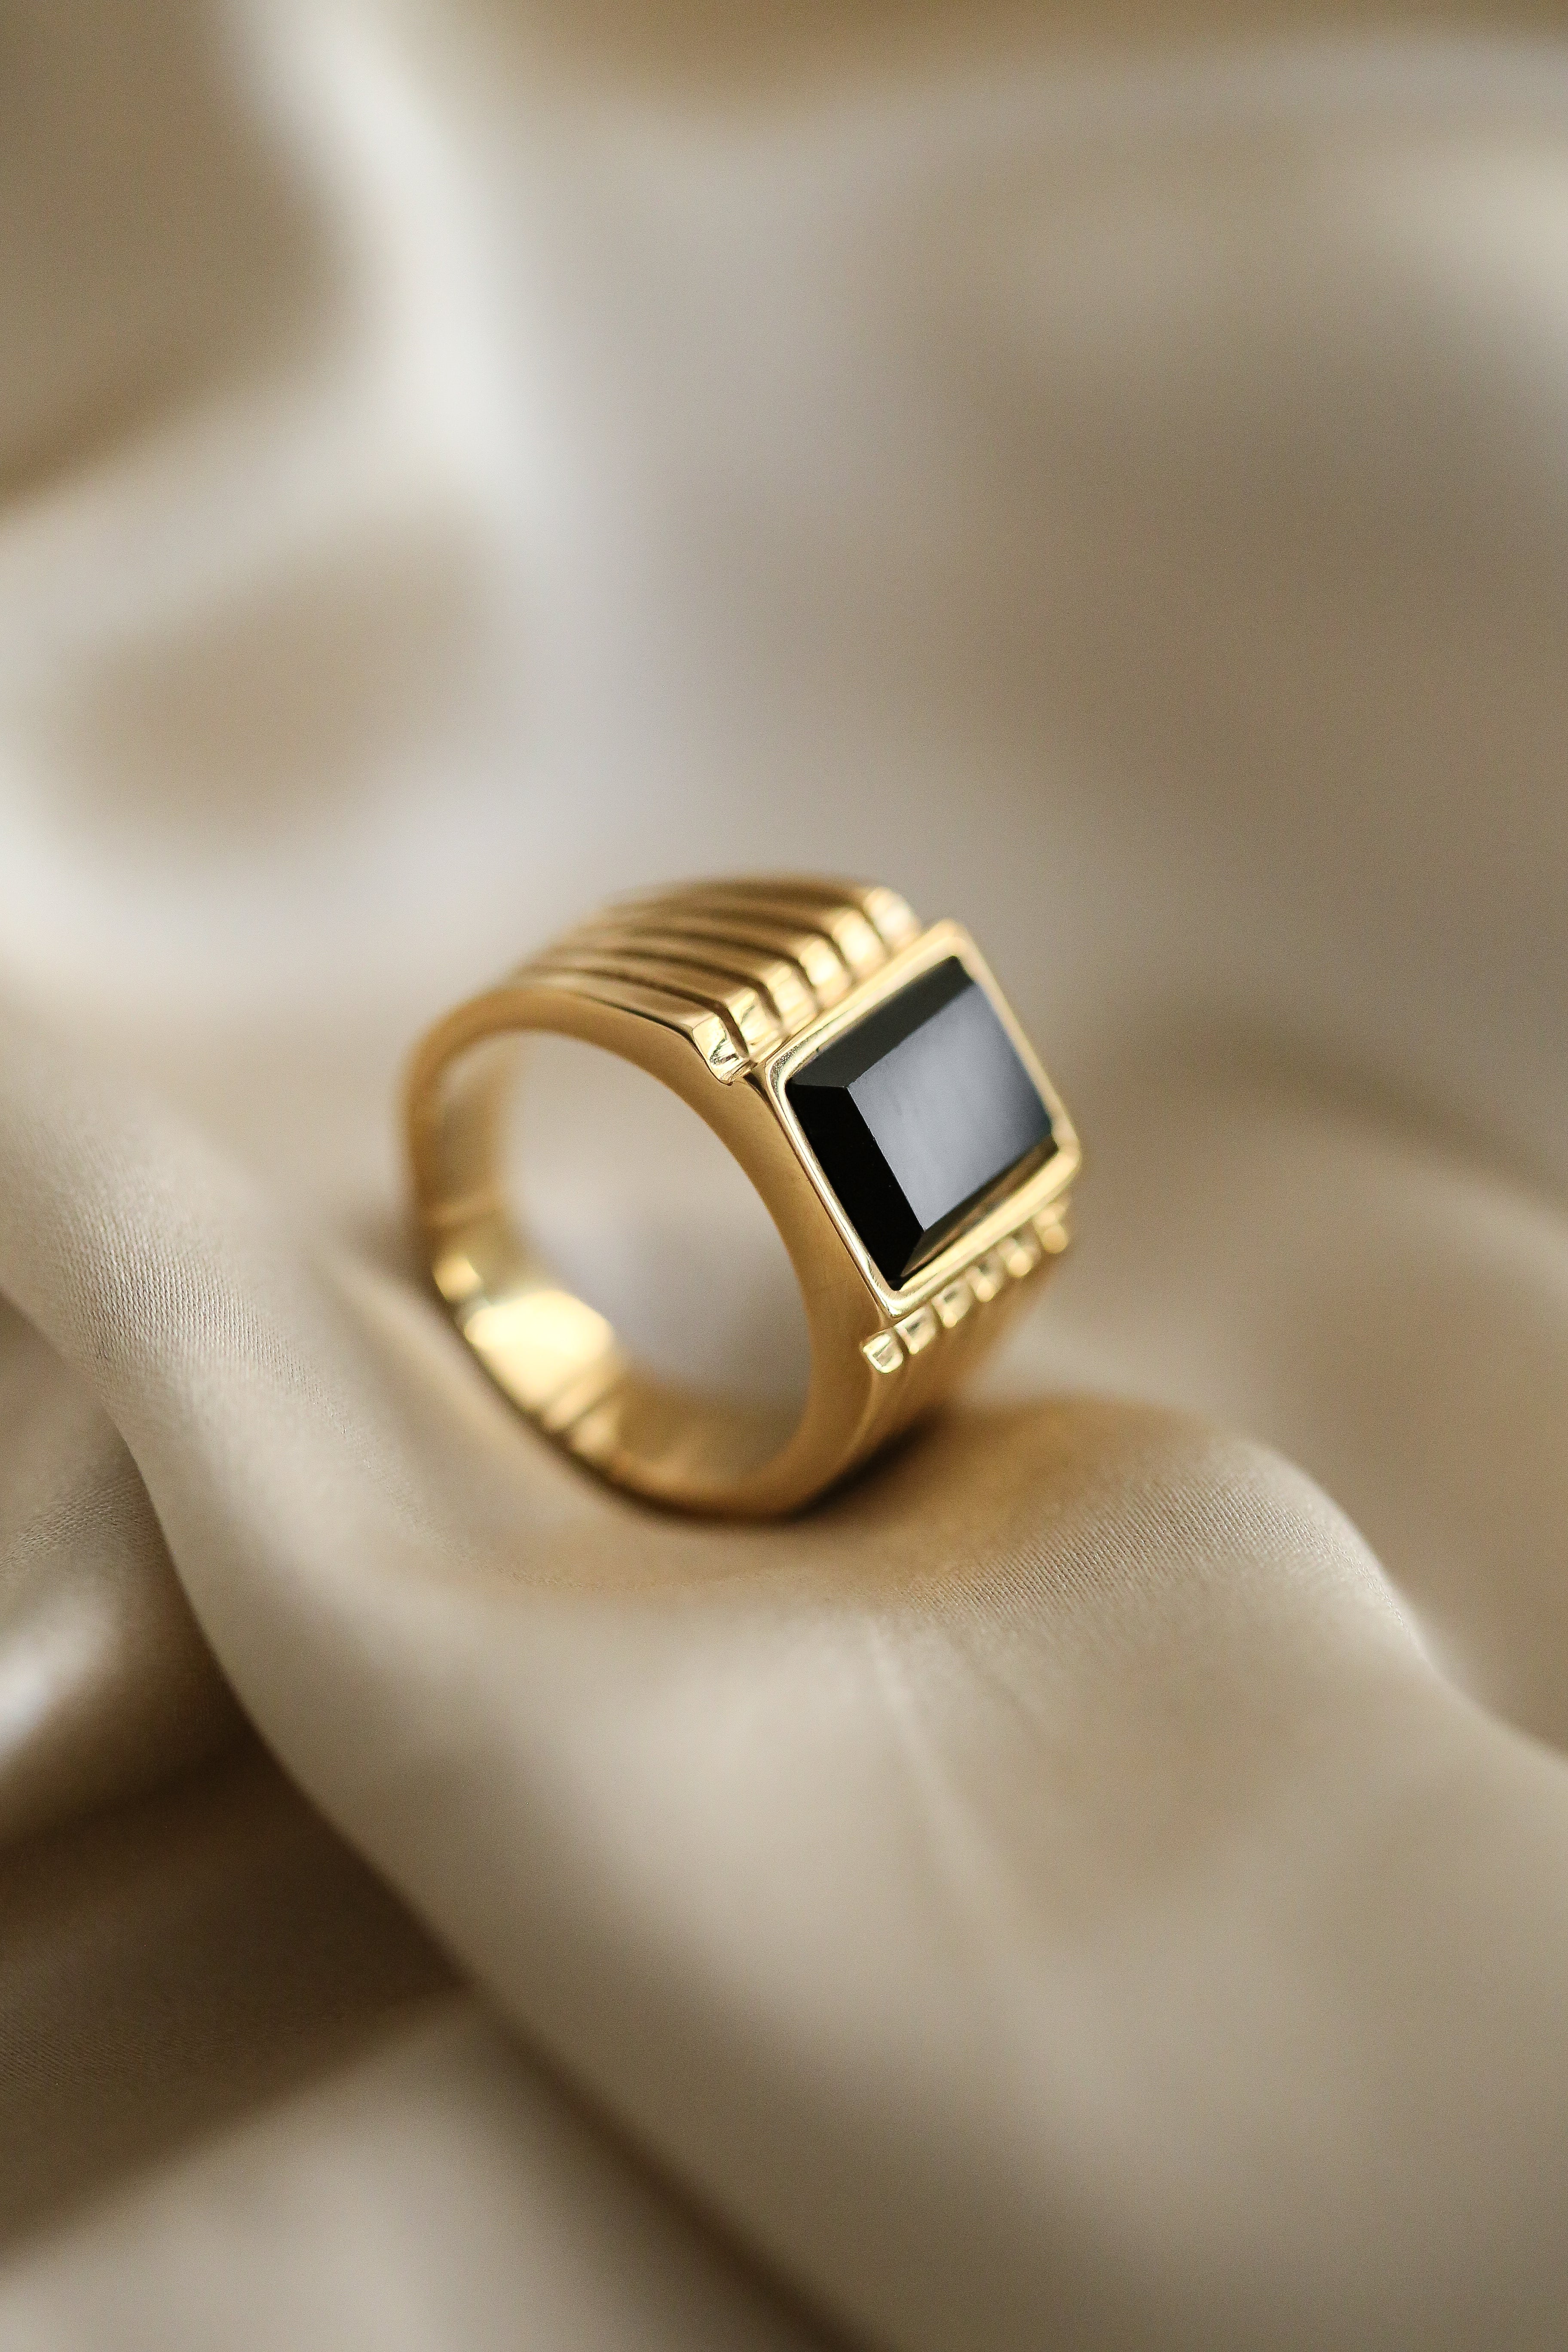 Odille Ring - Boutique Minimaliste has waterproof, durable, elegant and vintage inspired jewelry